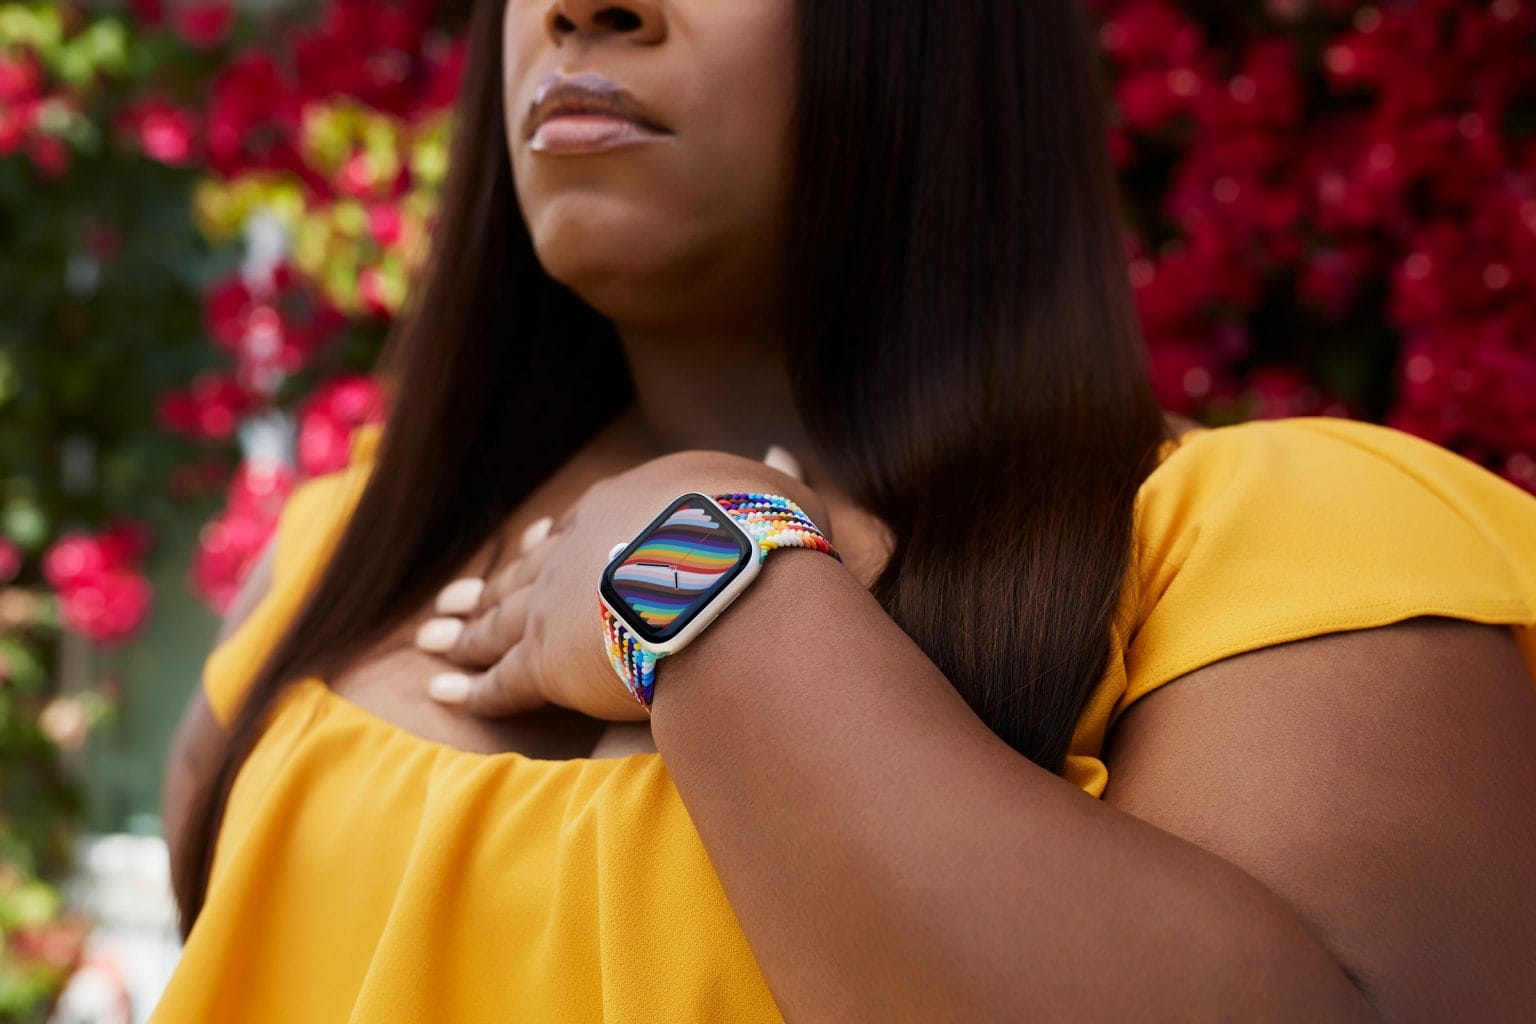 Apple’s unique Pride bands have been a visible illustration of the ways in which the company stands with, supports and is proudly made up of members of the LGBTQ+ community.